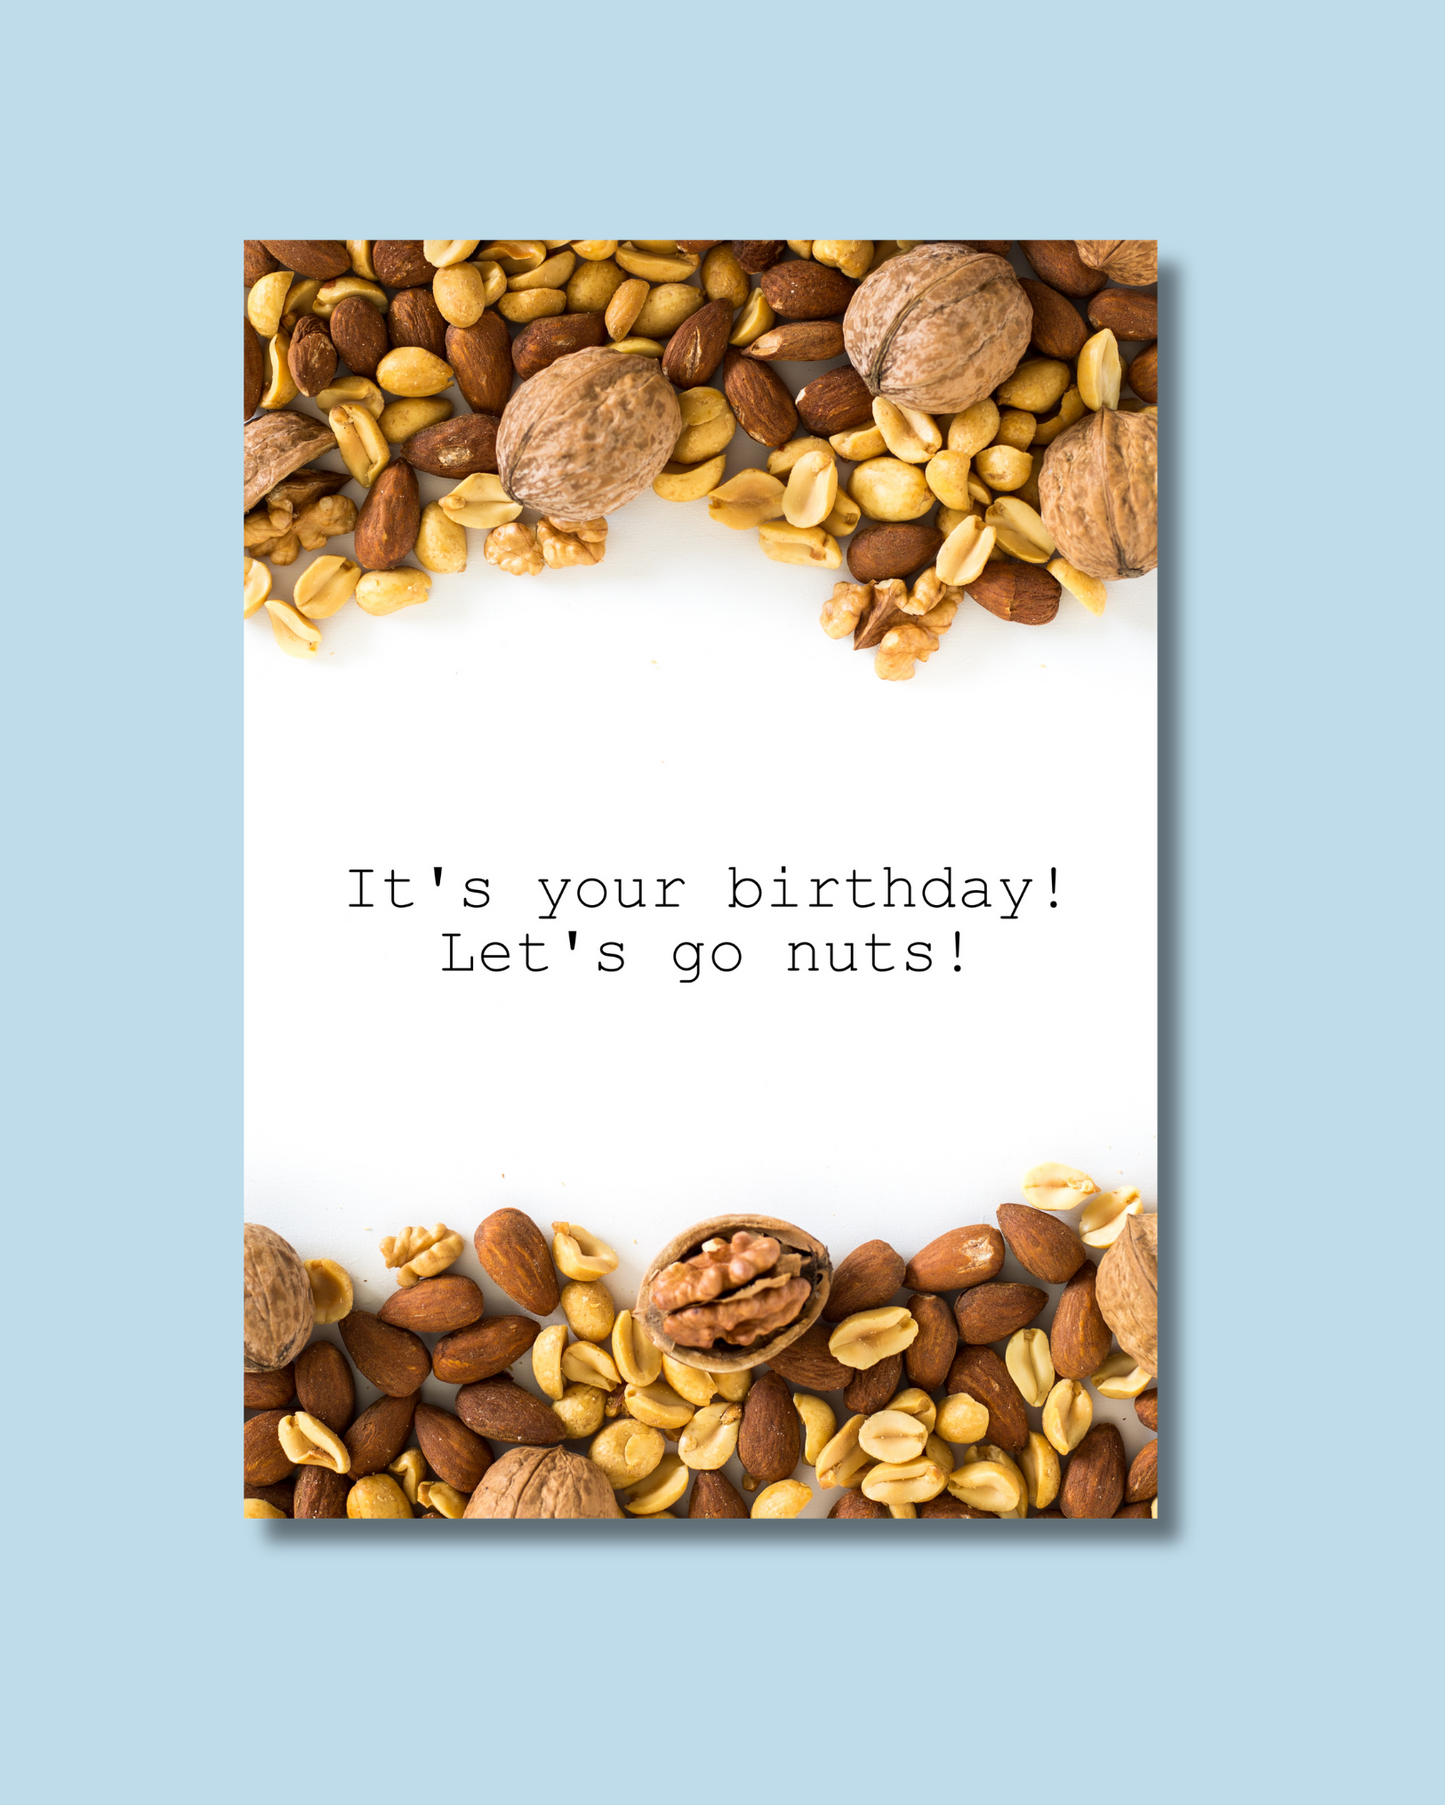 It's your birthday! Let's go nuts!